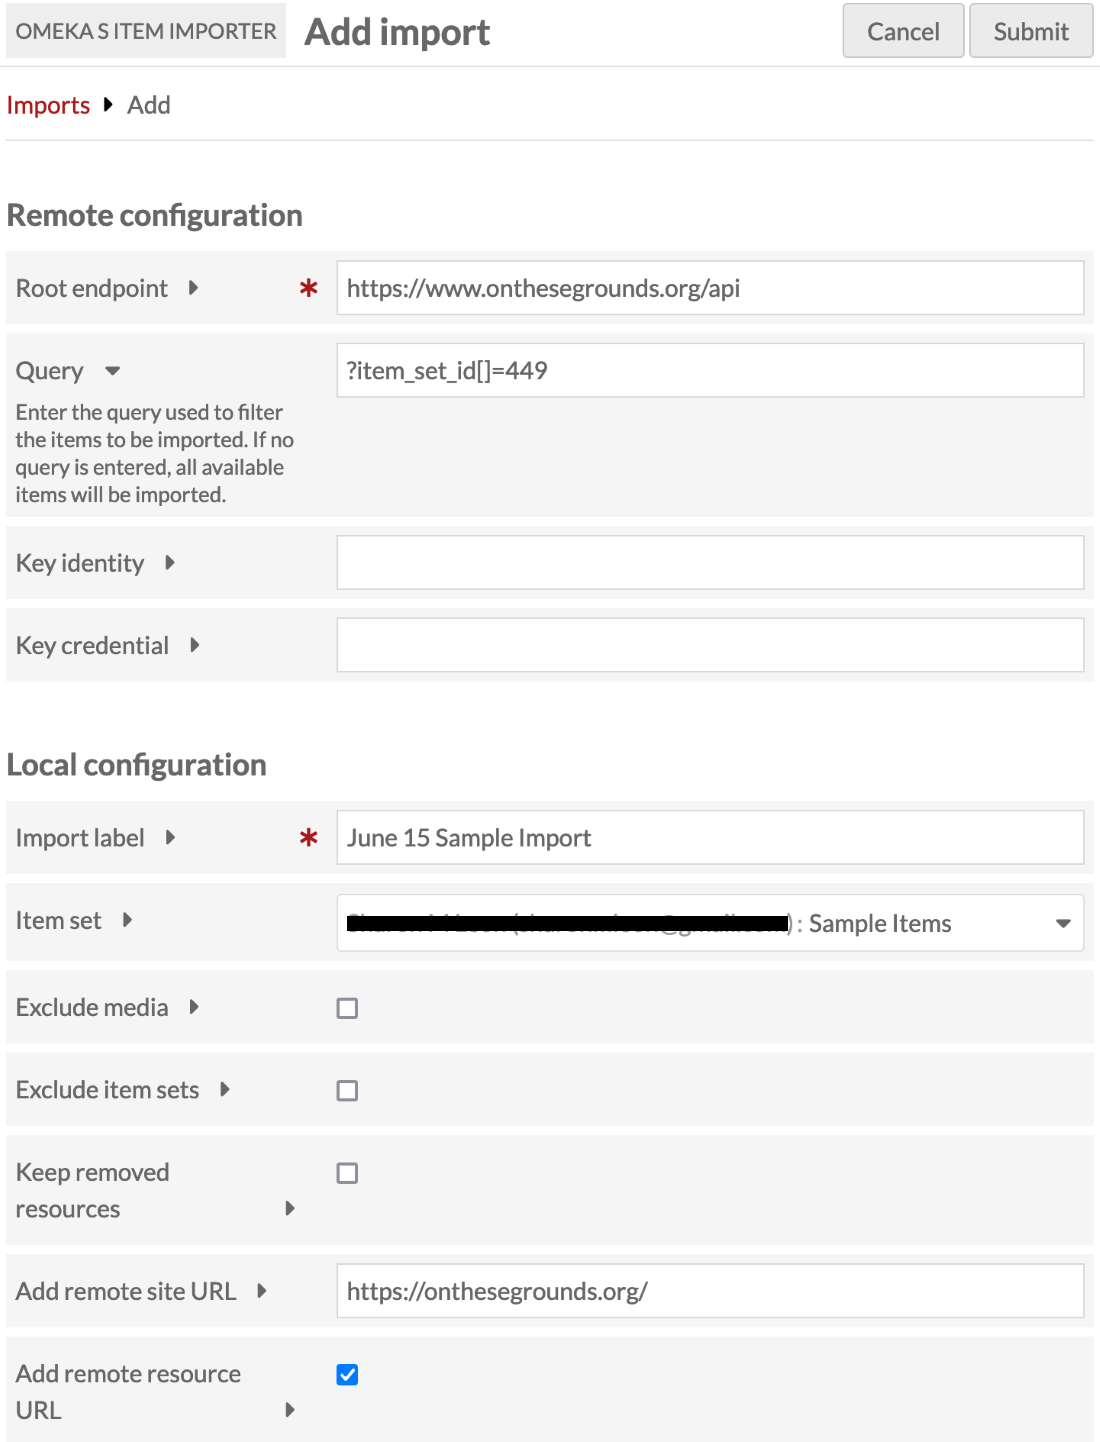 Add Import configuration form with data filled in for root endpoint, query, import label, item set and remote site URL